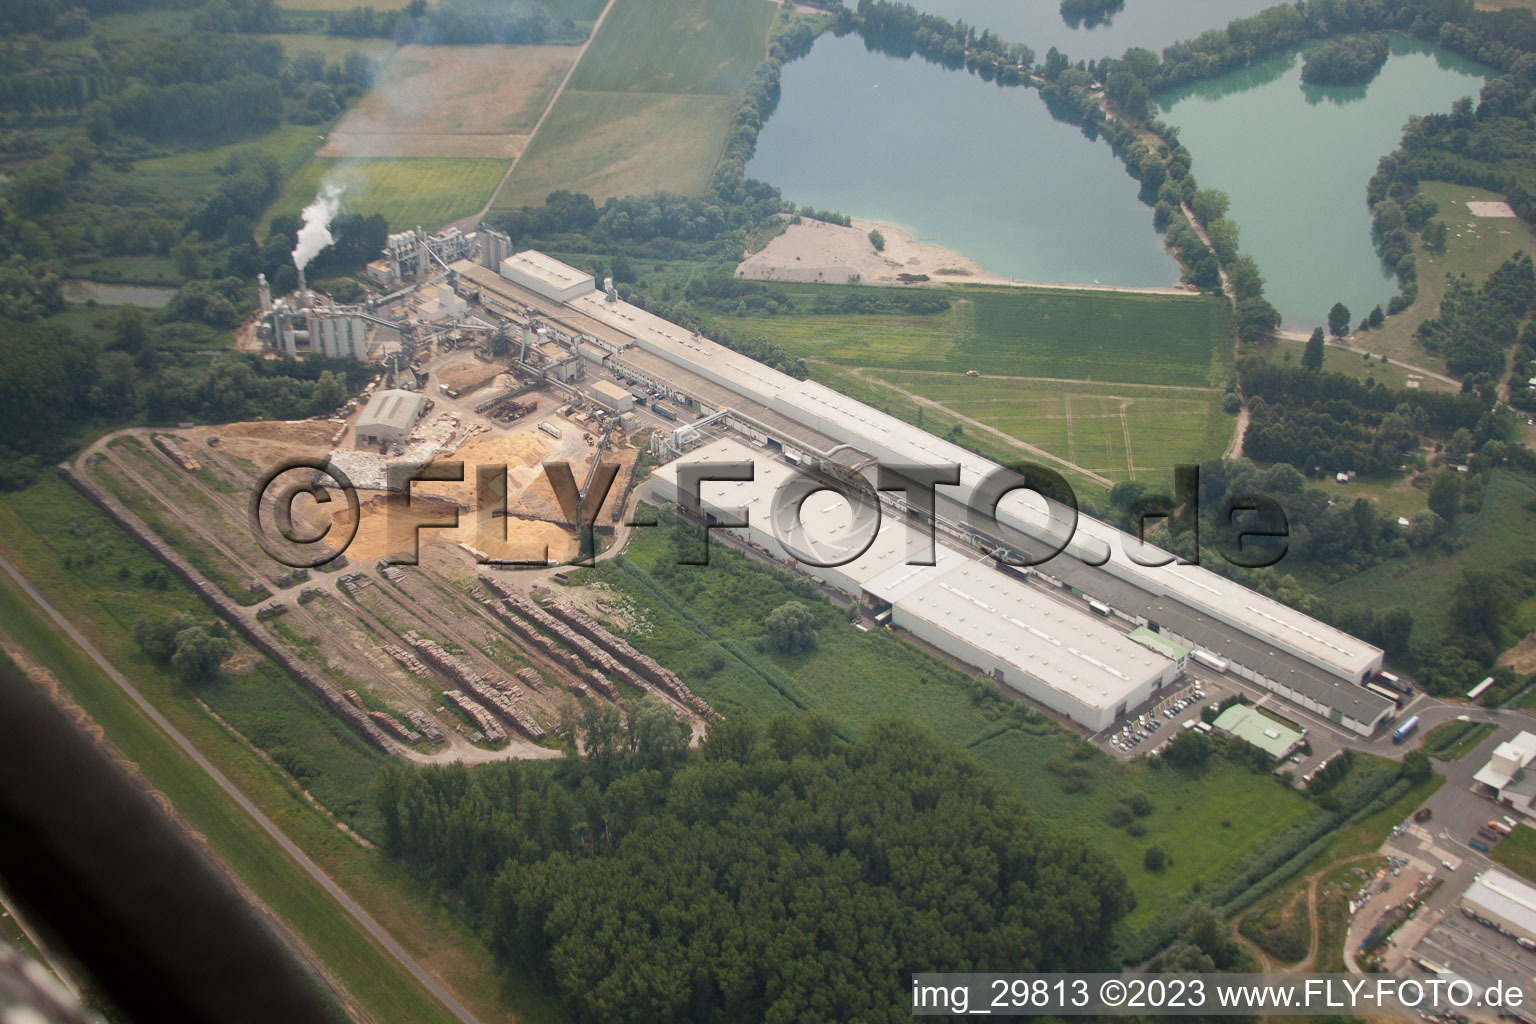 Drone image of Nolte furniture and woodworks in Germersheim in the state Rhineland-Palatinate, Germany